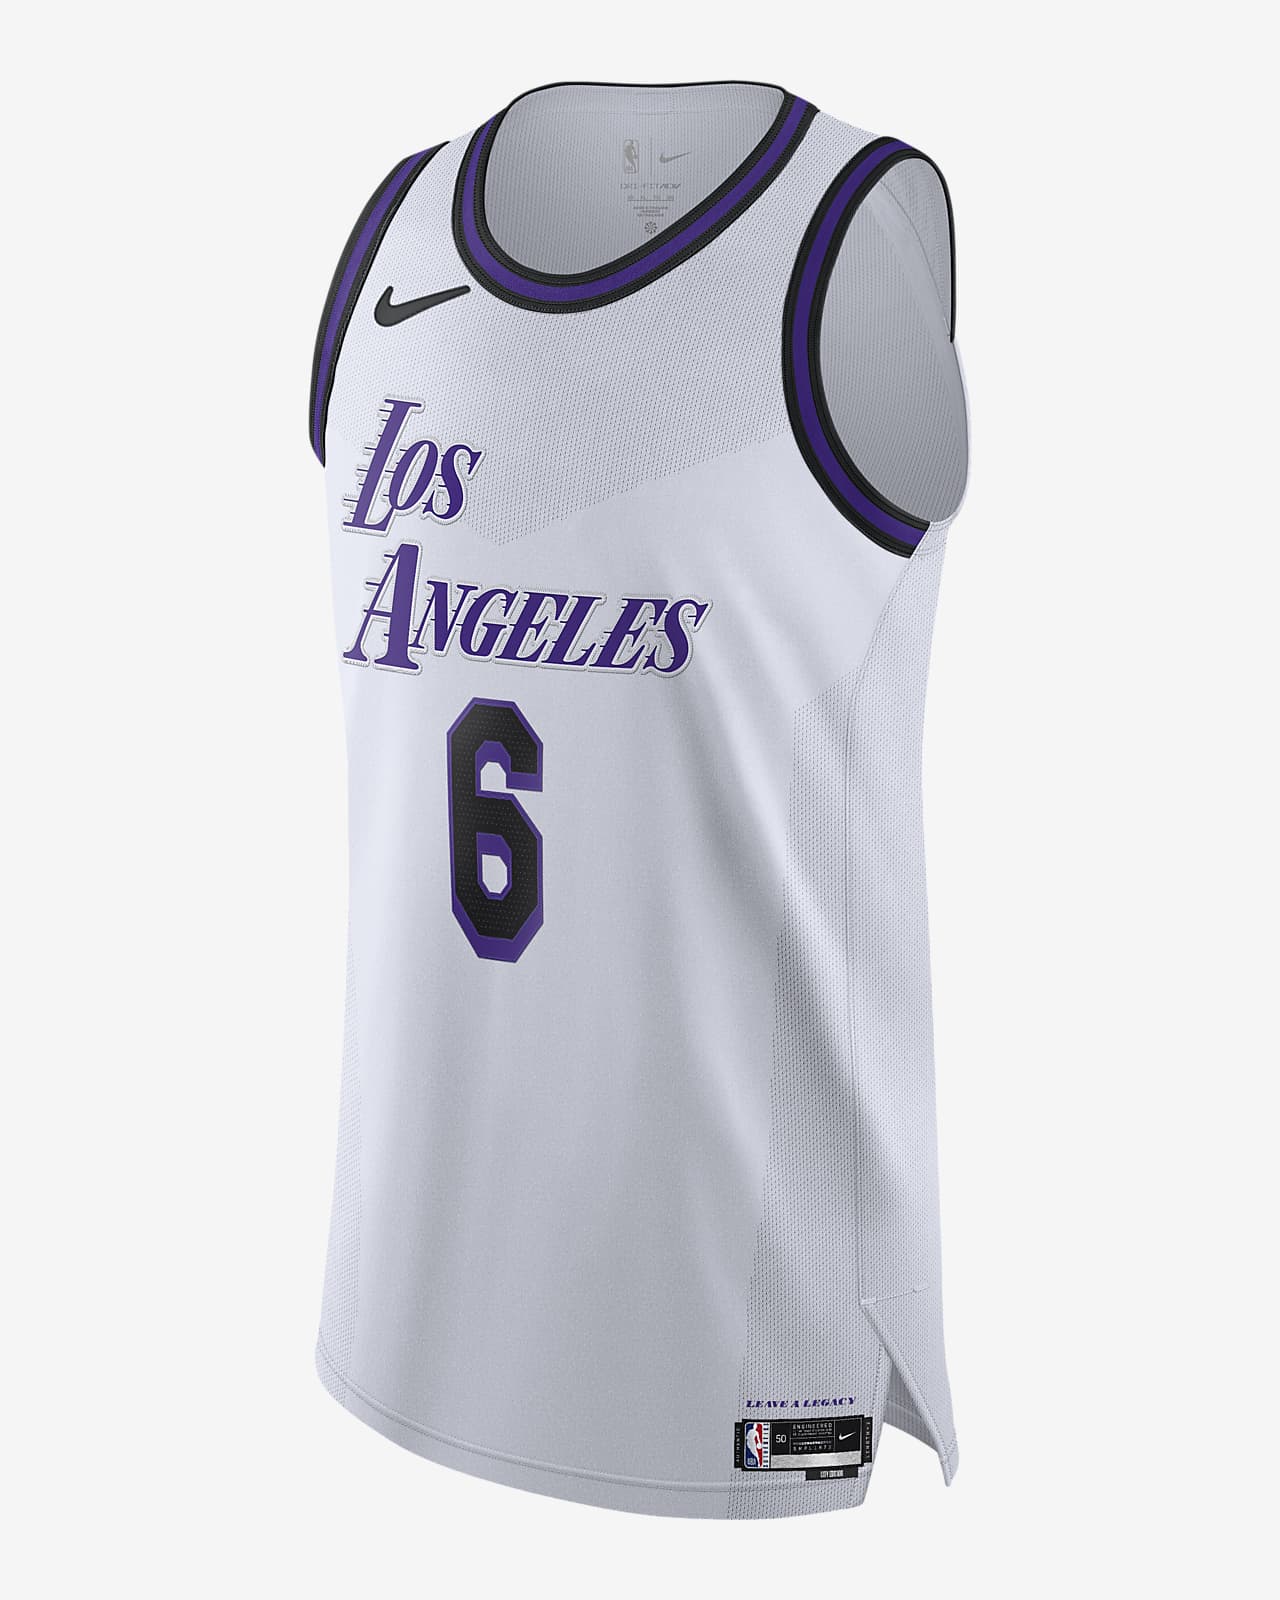 The latest NBA 'City Edition Uniform' Nike jerseys for all 30